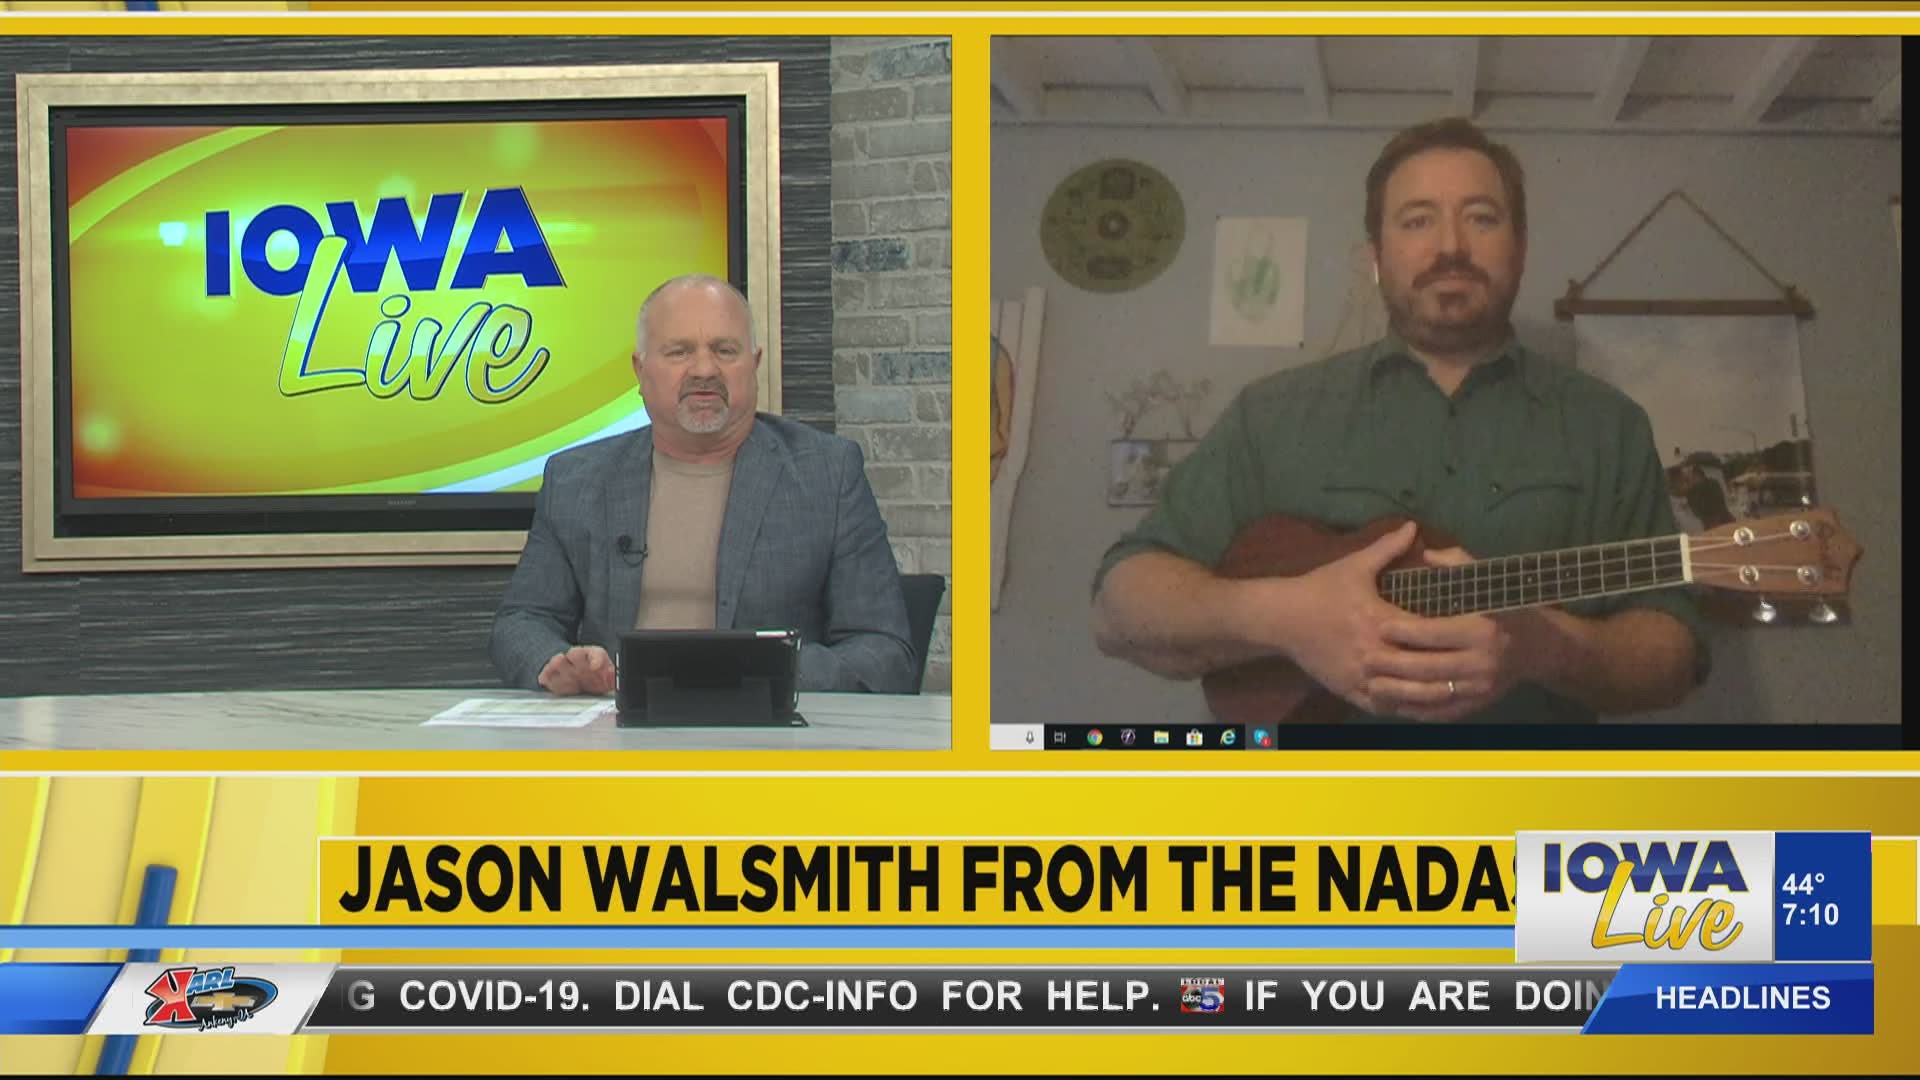 Jason Walsmith of the Nadas performs on Iowa Live and announces their new record